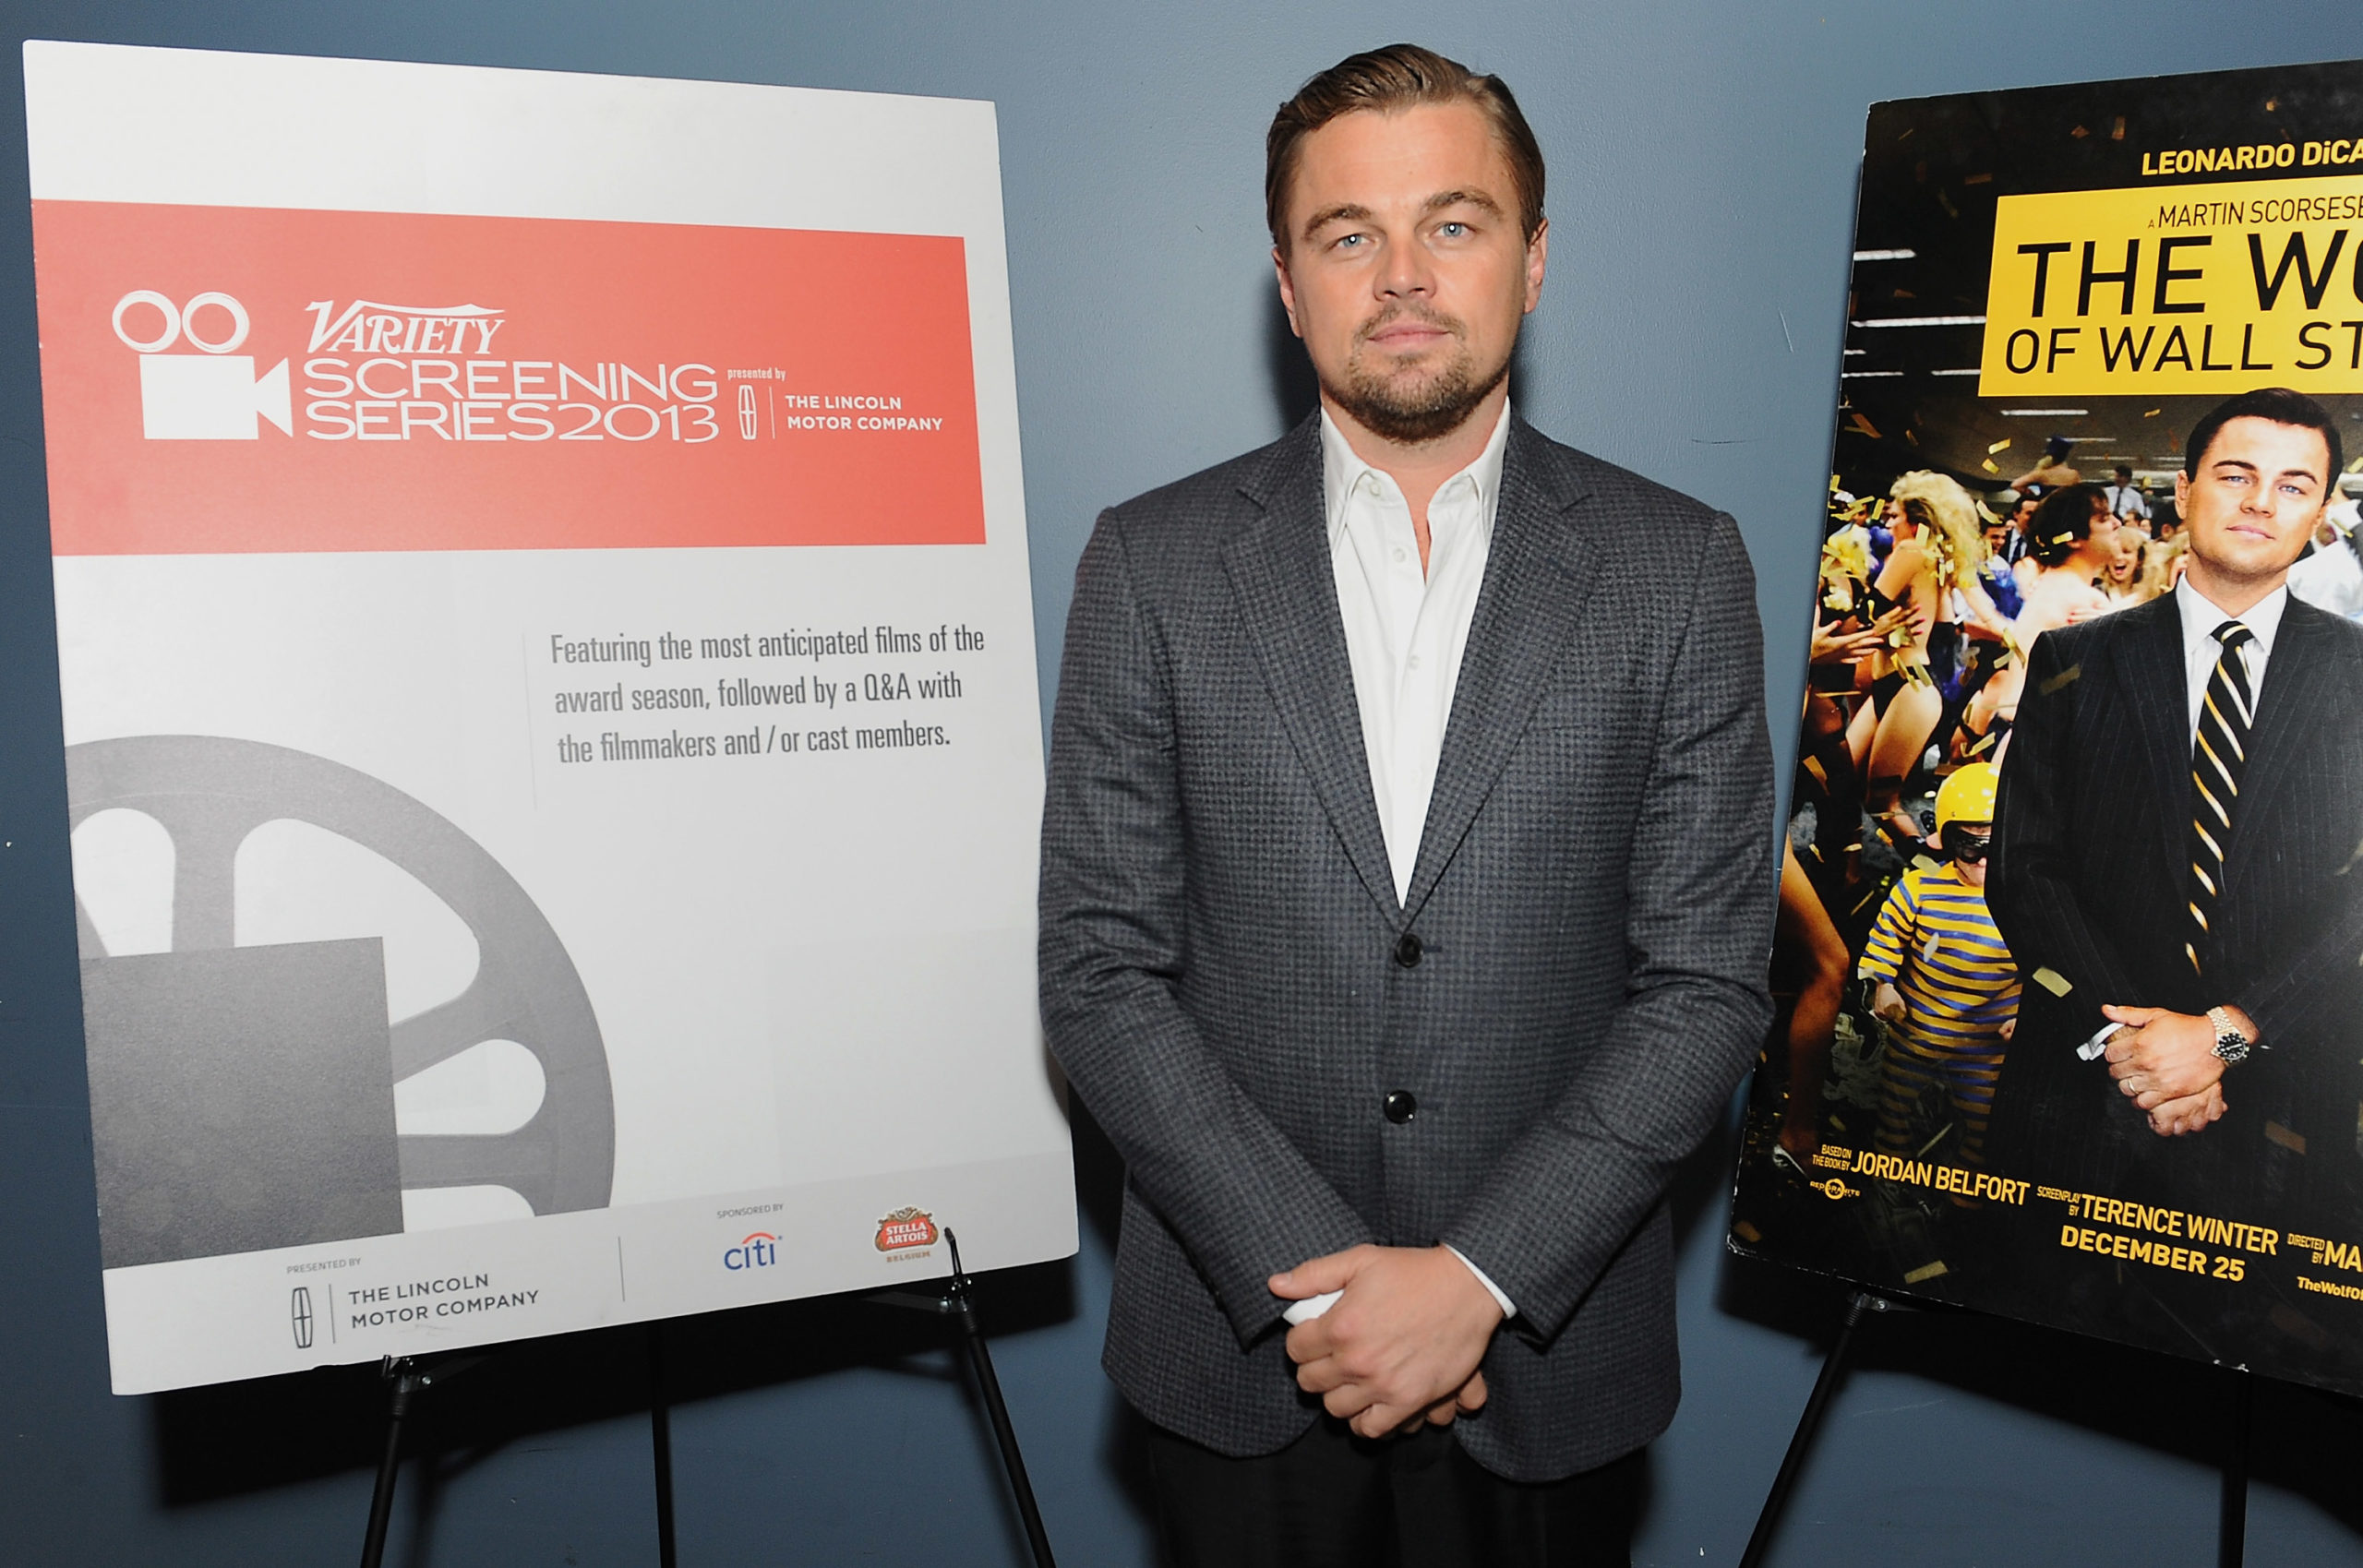 HOLLYWOOD, CA - FEBRUARY 10: Actor Leonardo DiCaprio attends the 2014 Variety Screening Series of 'The Wolf of Wall Street' at ArcLight Hollywood on February 10, 2014 in Hollywood, California.